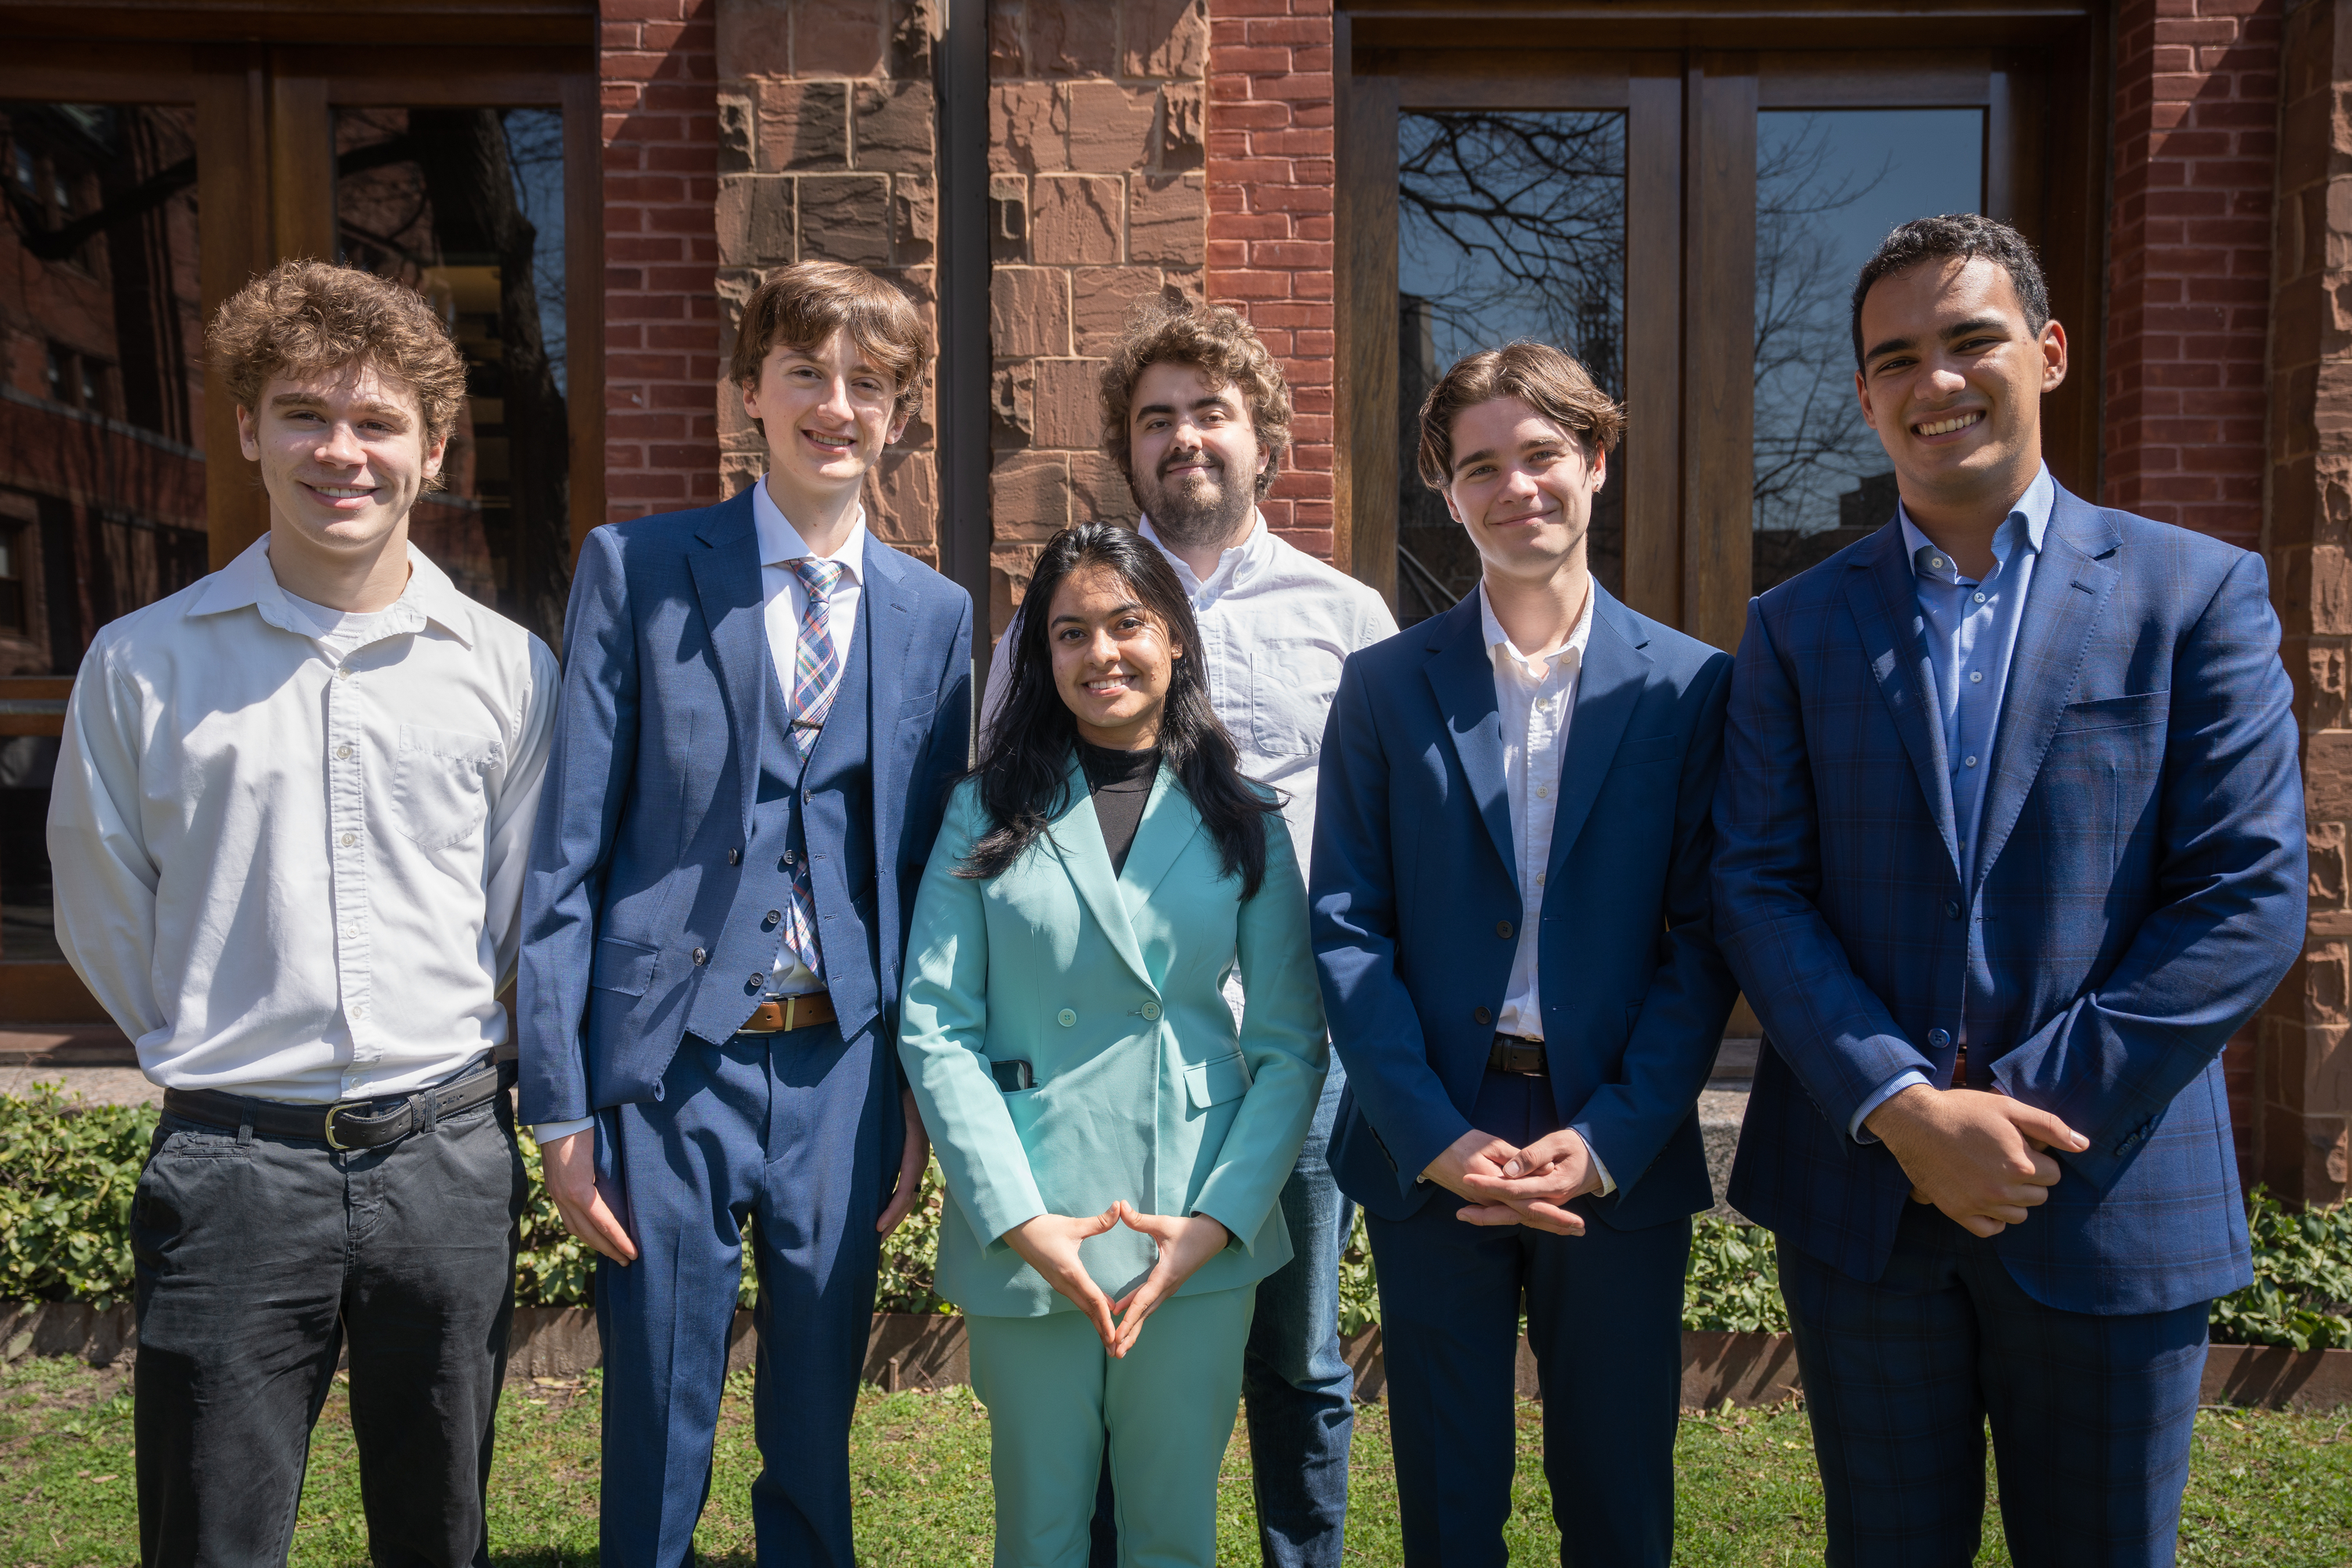 Six students wearing business attire smile in the Munk garden in 1 Devonshire Place